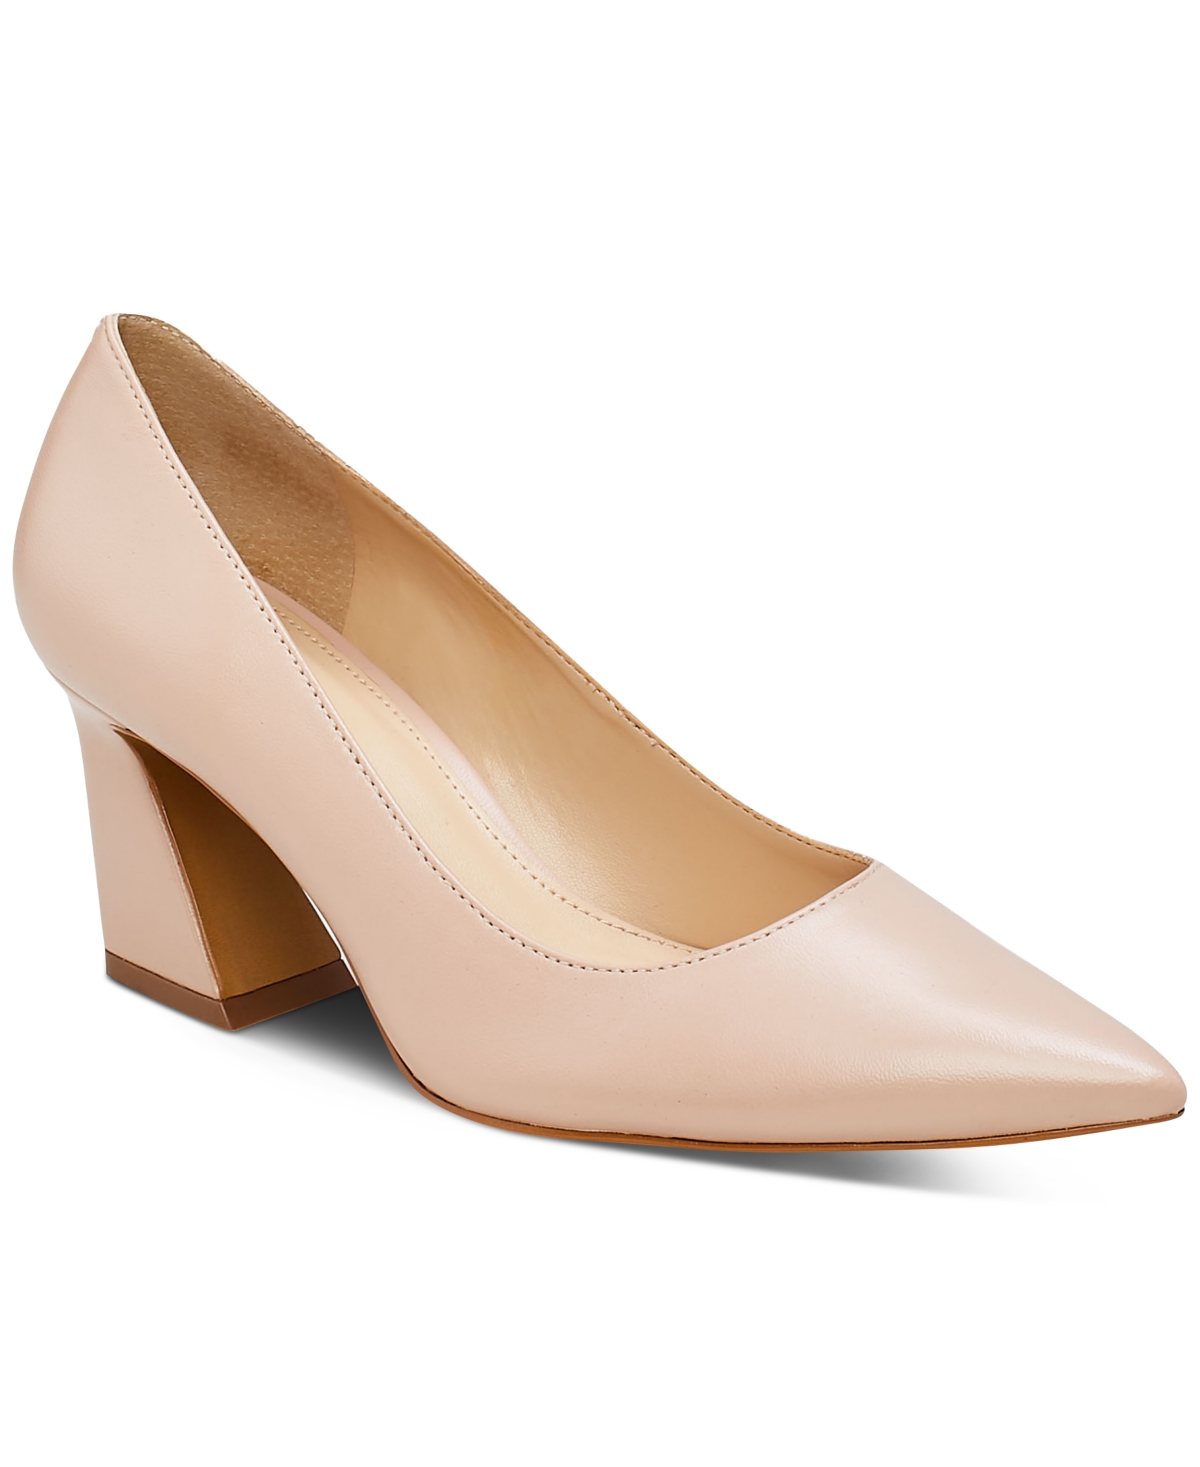 Vince Camuto Women's Hailenda Pointed-toe Flare-heel Pumps In Soft Blush Leather